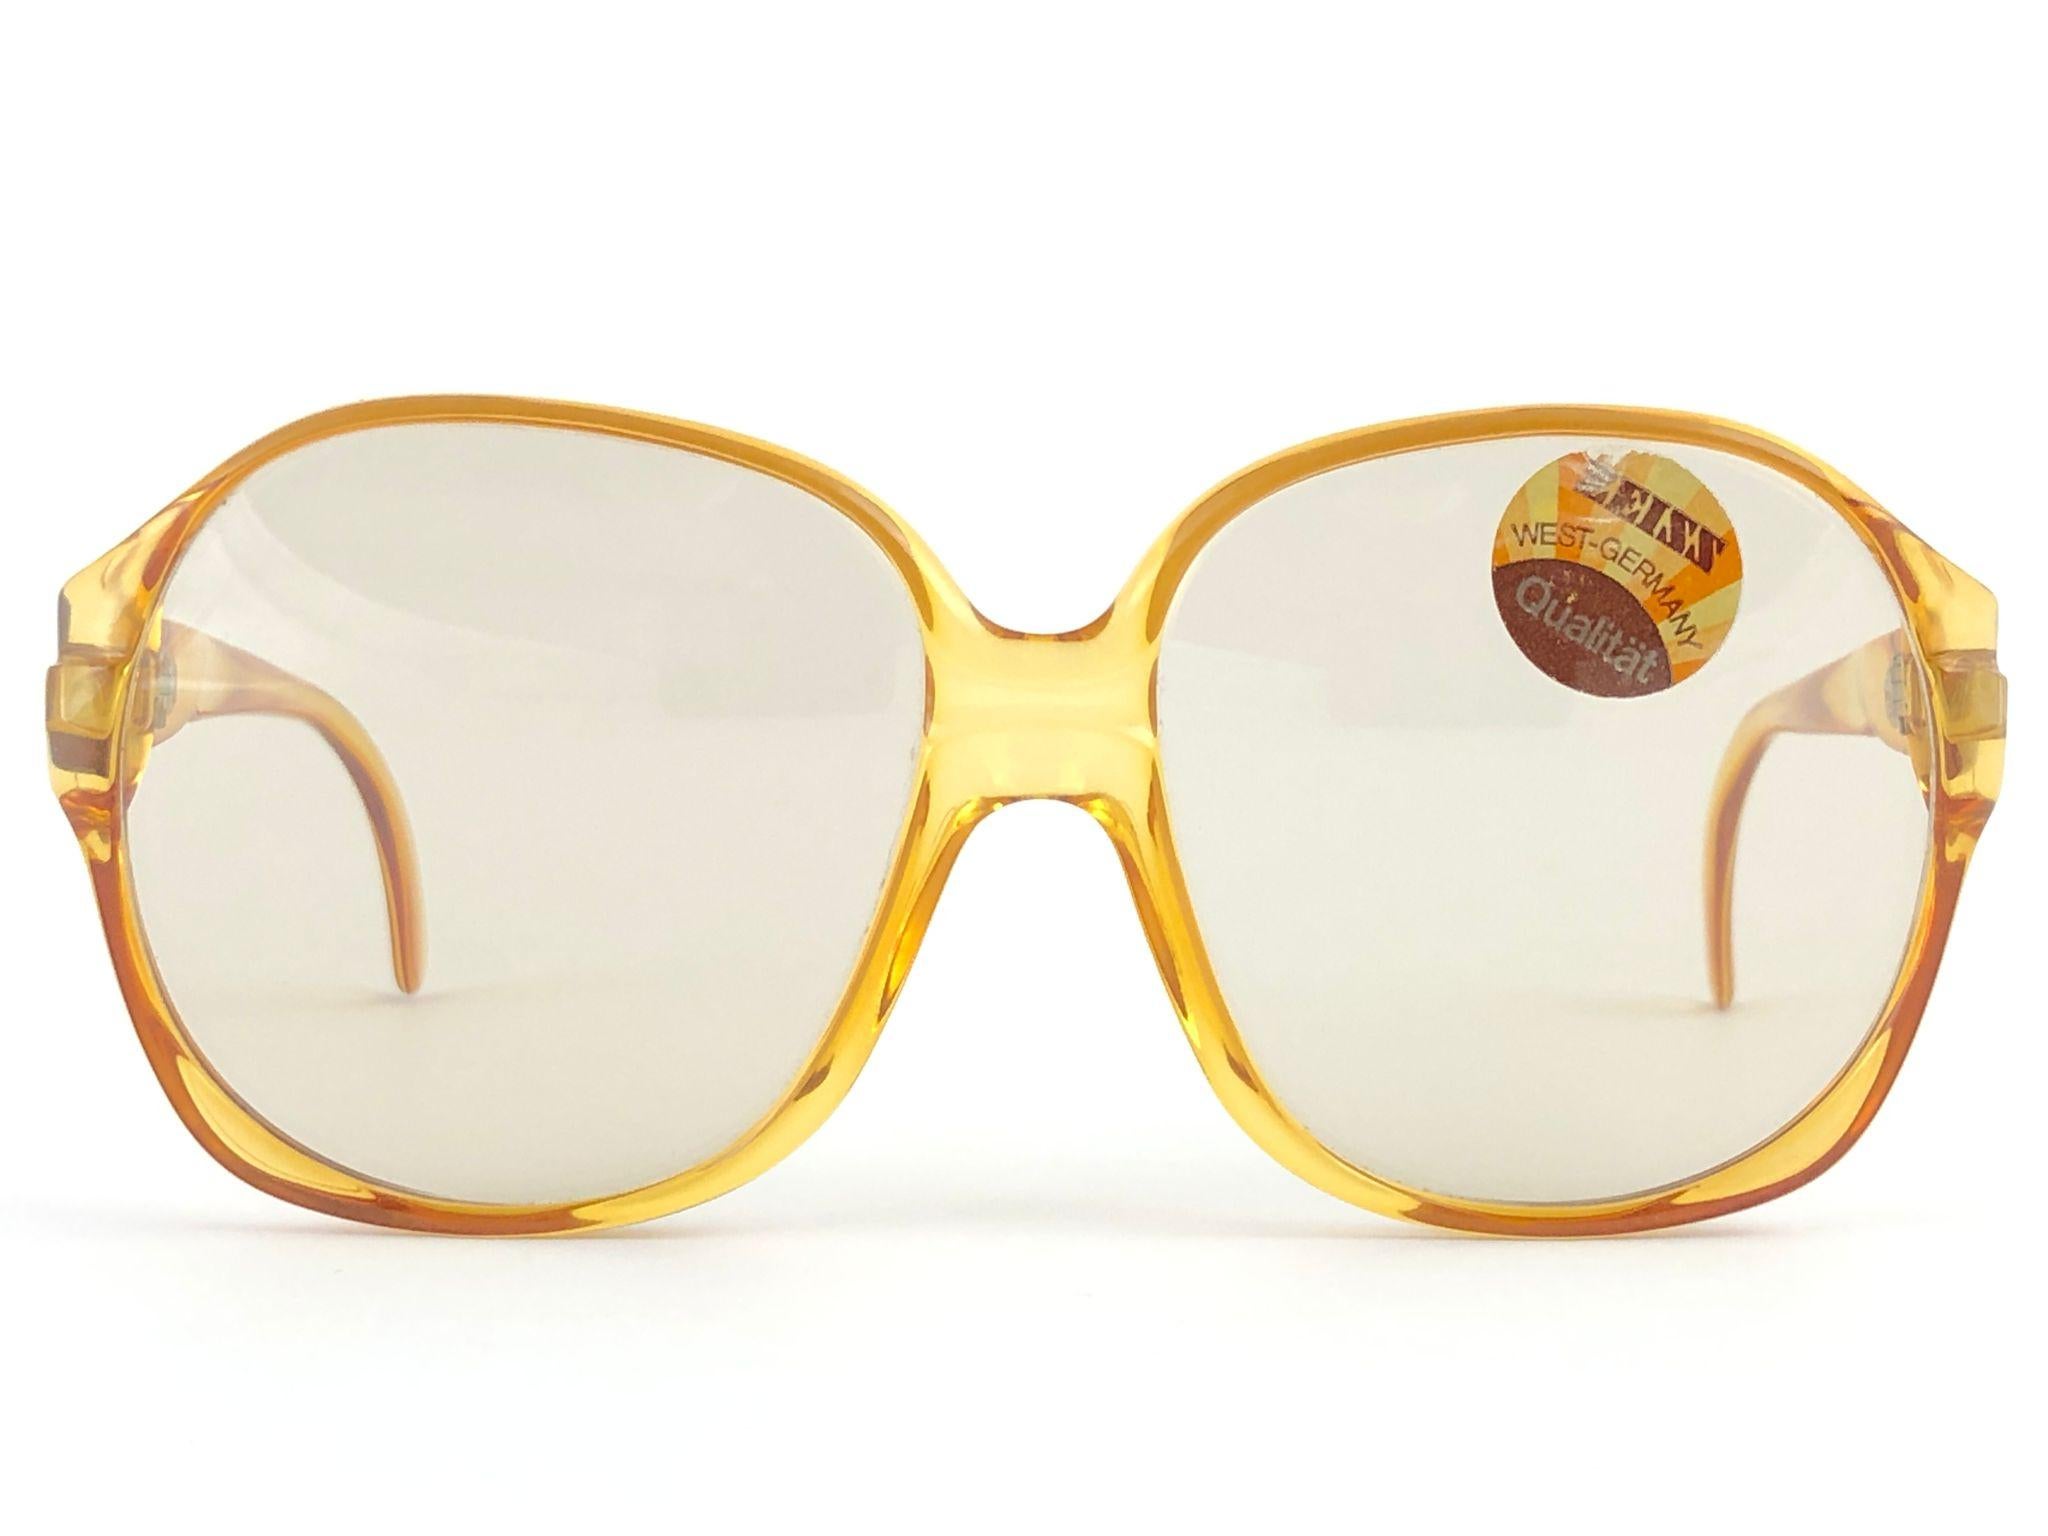 New vintage Zeiss oversized amber frame.

Two shades of clear amber frame holding a pair of light changeable lenses.

Made in West Germany


MEASUREMENTS:

Front :             14.5 cms

Lens Height :  5.8 cms

Lens Width :   5.9 cms

Temples :      